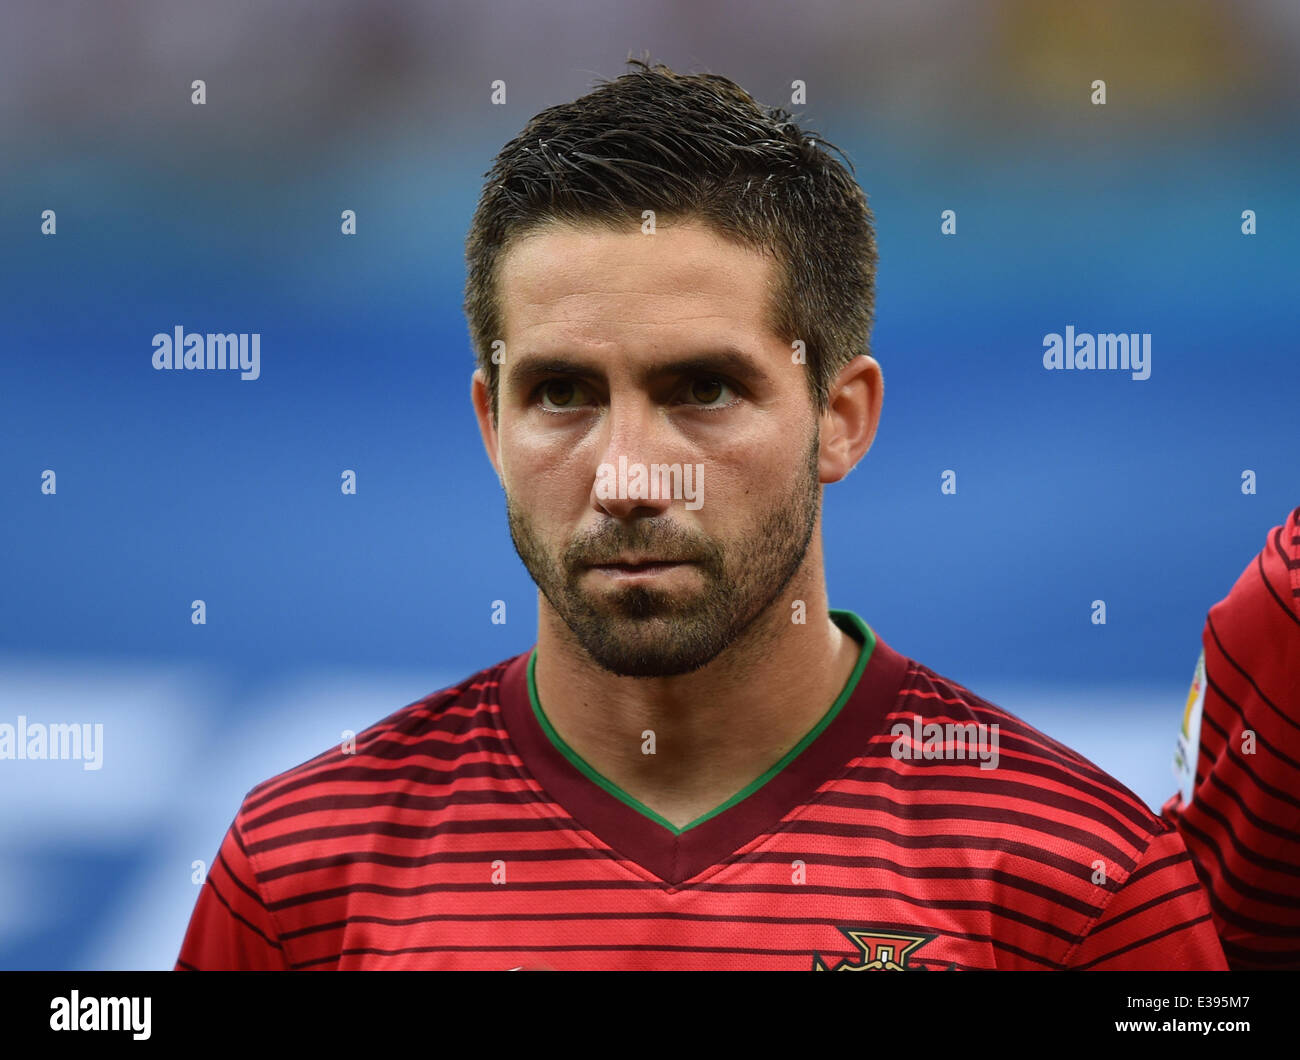 Manaus, Brazil. 22nd June, 2014. Joao Moutinho of Portugal seen the national anthem prior to the FIFA World Cup 2014 group G preliminary round match between the USA and Portugal at the Arena Amazonia Stadium in Manaus, Brazil, 22 June 2014. Photo: Marius Becker/dpa/Alamy Live News Stock Photo